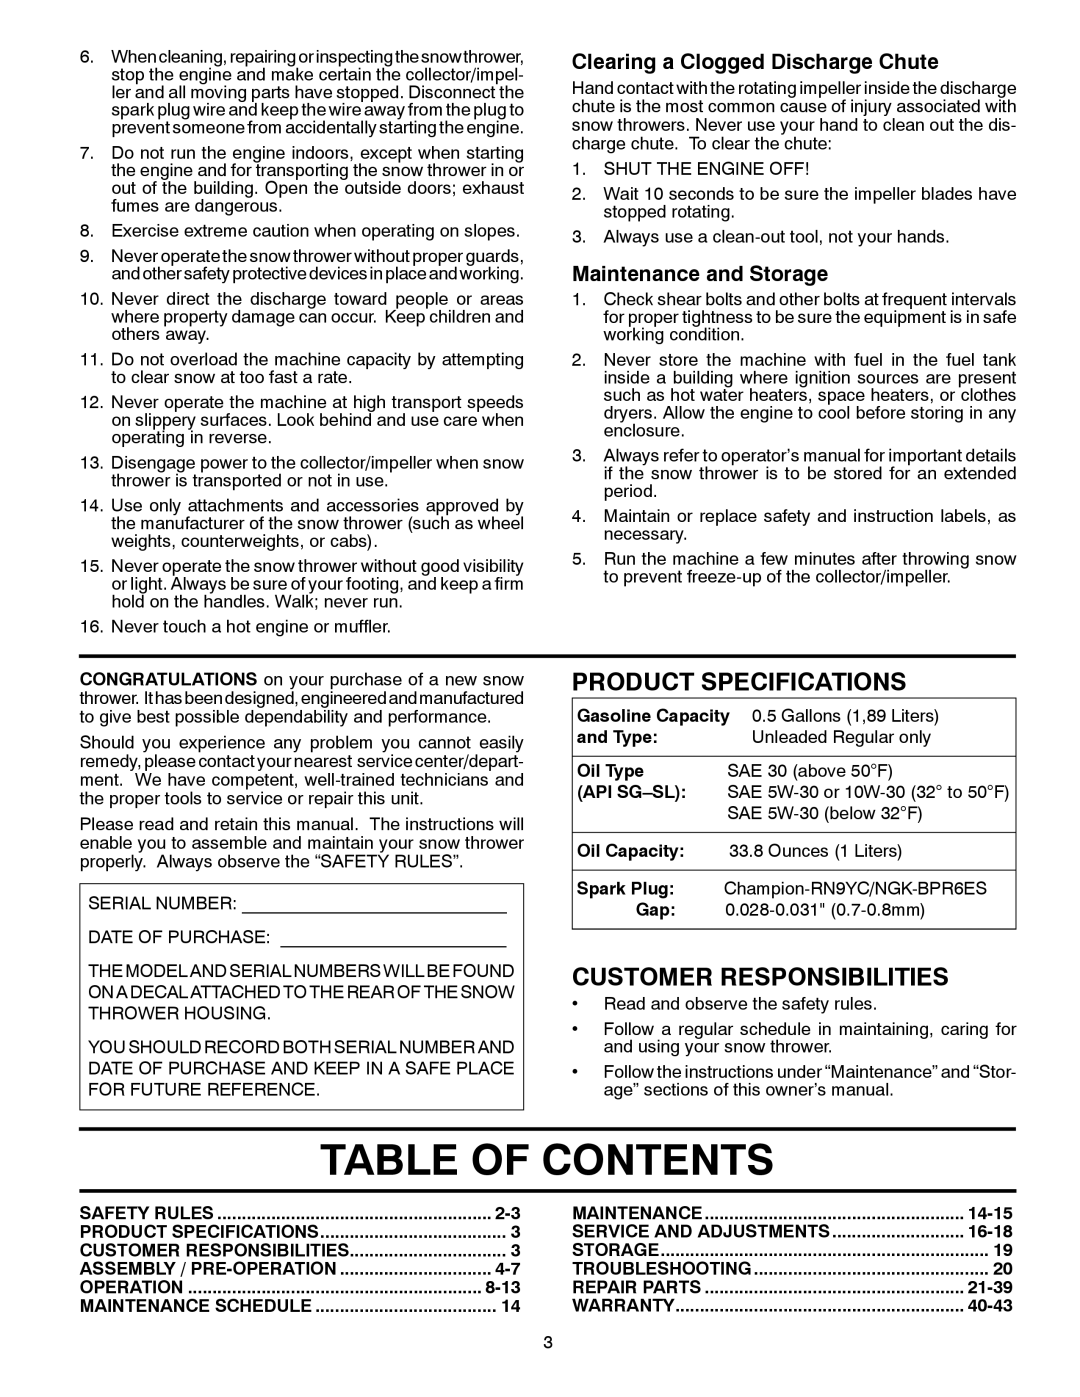 Poulan 428550 Table Of Contents, Product Specifications, Customer Responsibilities, Clearing a Clogged Discharge Chute 